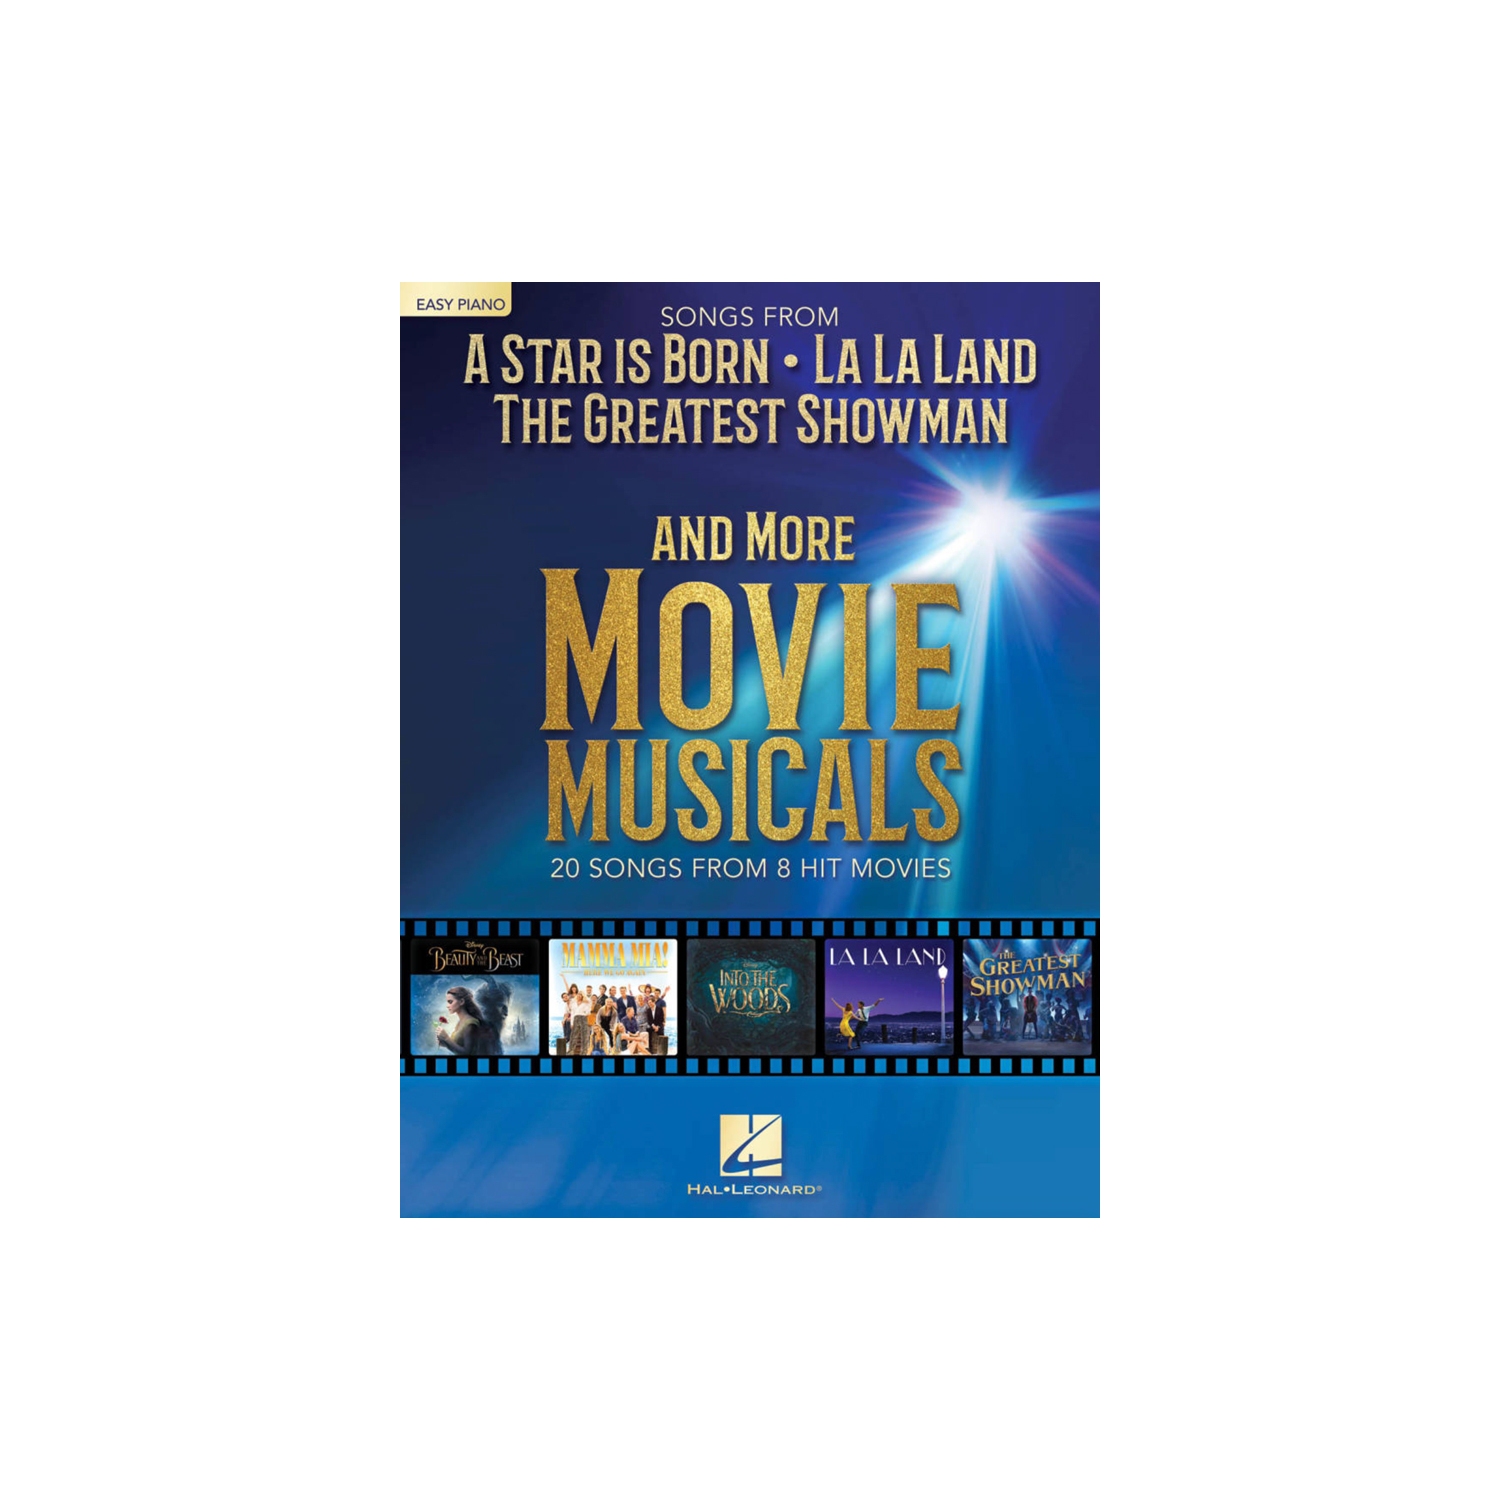 Songs from A Star Is Born, The Greatest Showman, La La Land, and More Movie Musicals (EP)